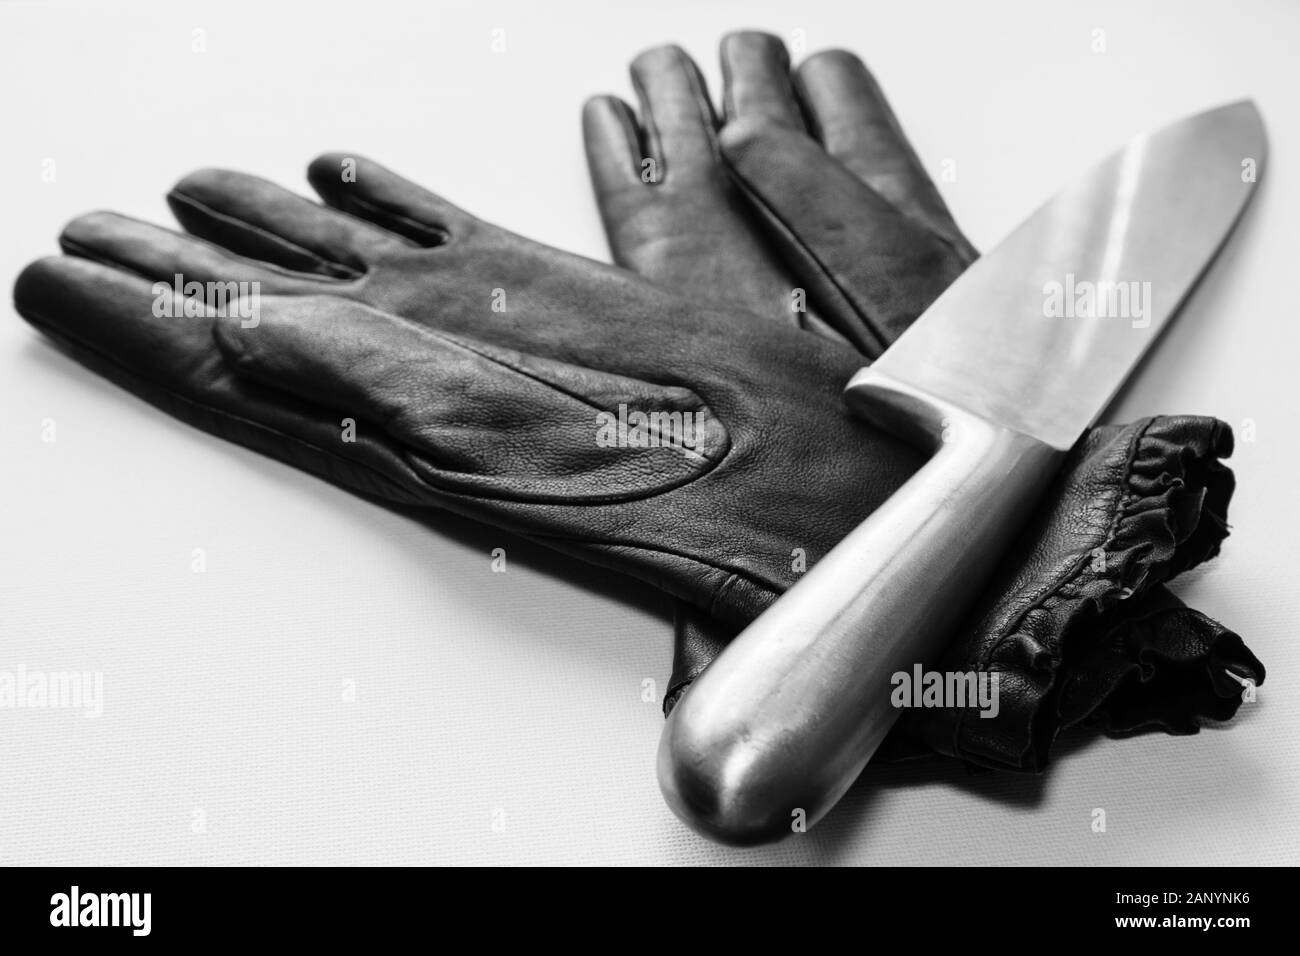 Selective focus shot of metal knife over black gloves on a white surface Stock Photo